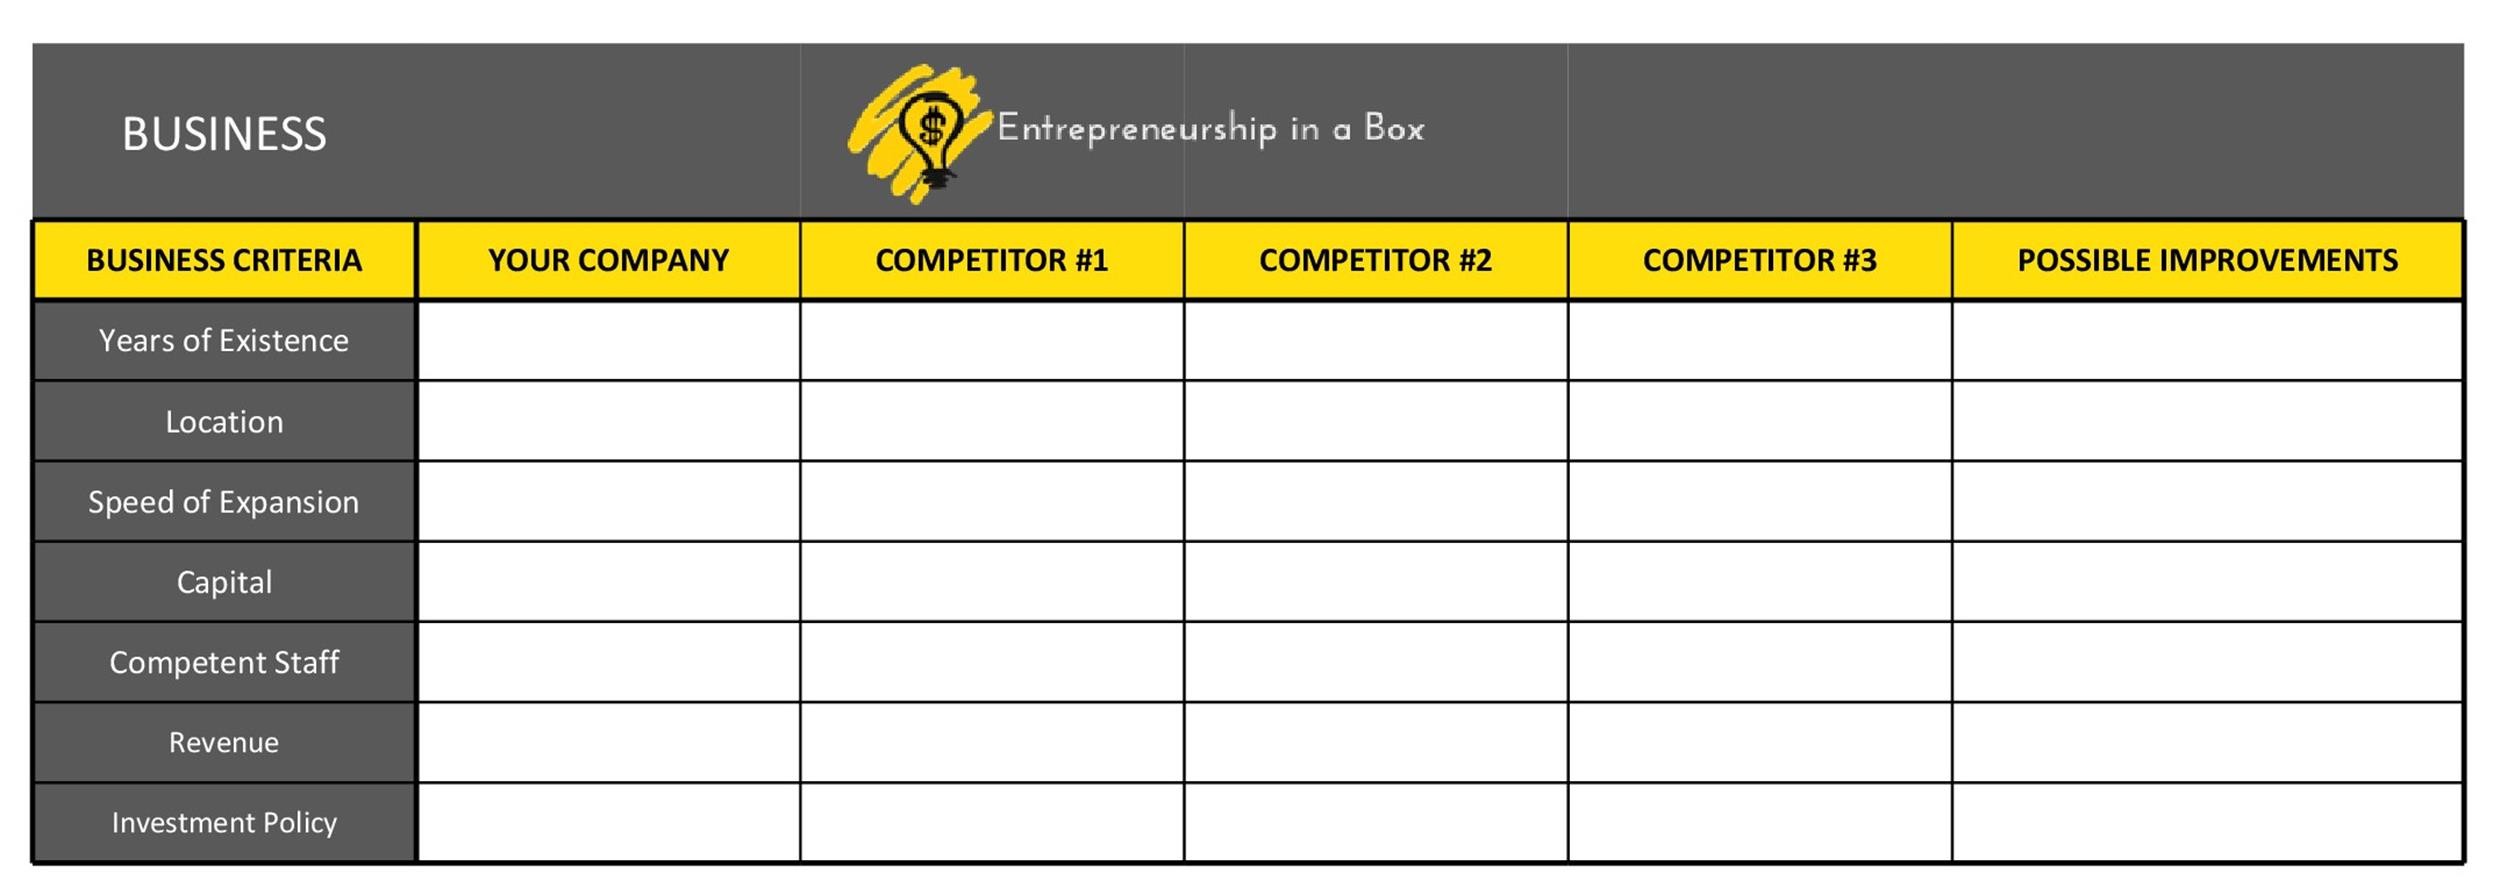 Competitive Analysis Templates 40 Great Examples Excel Word PDF PPT 